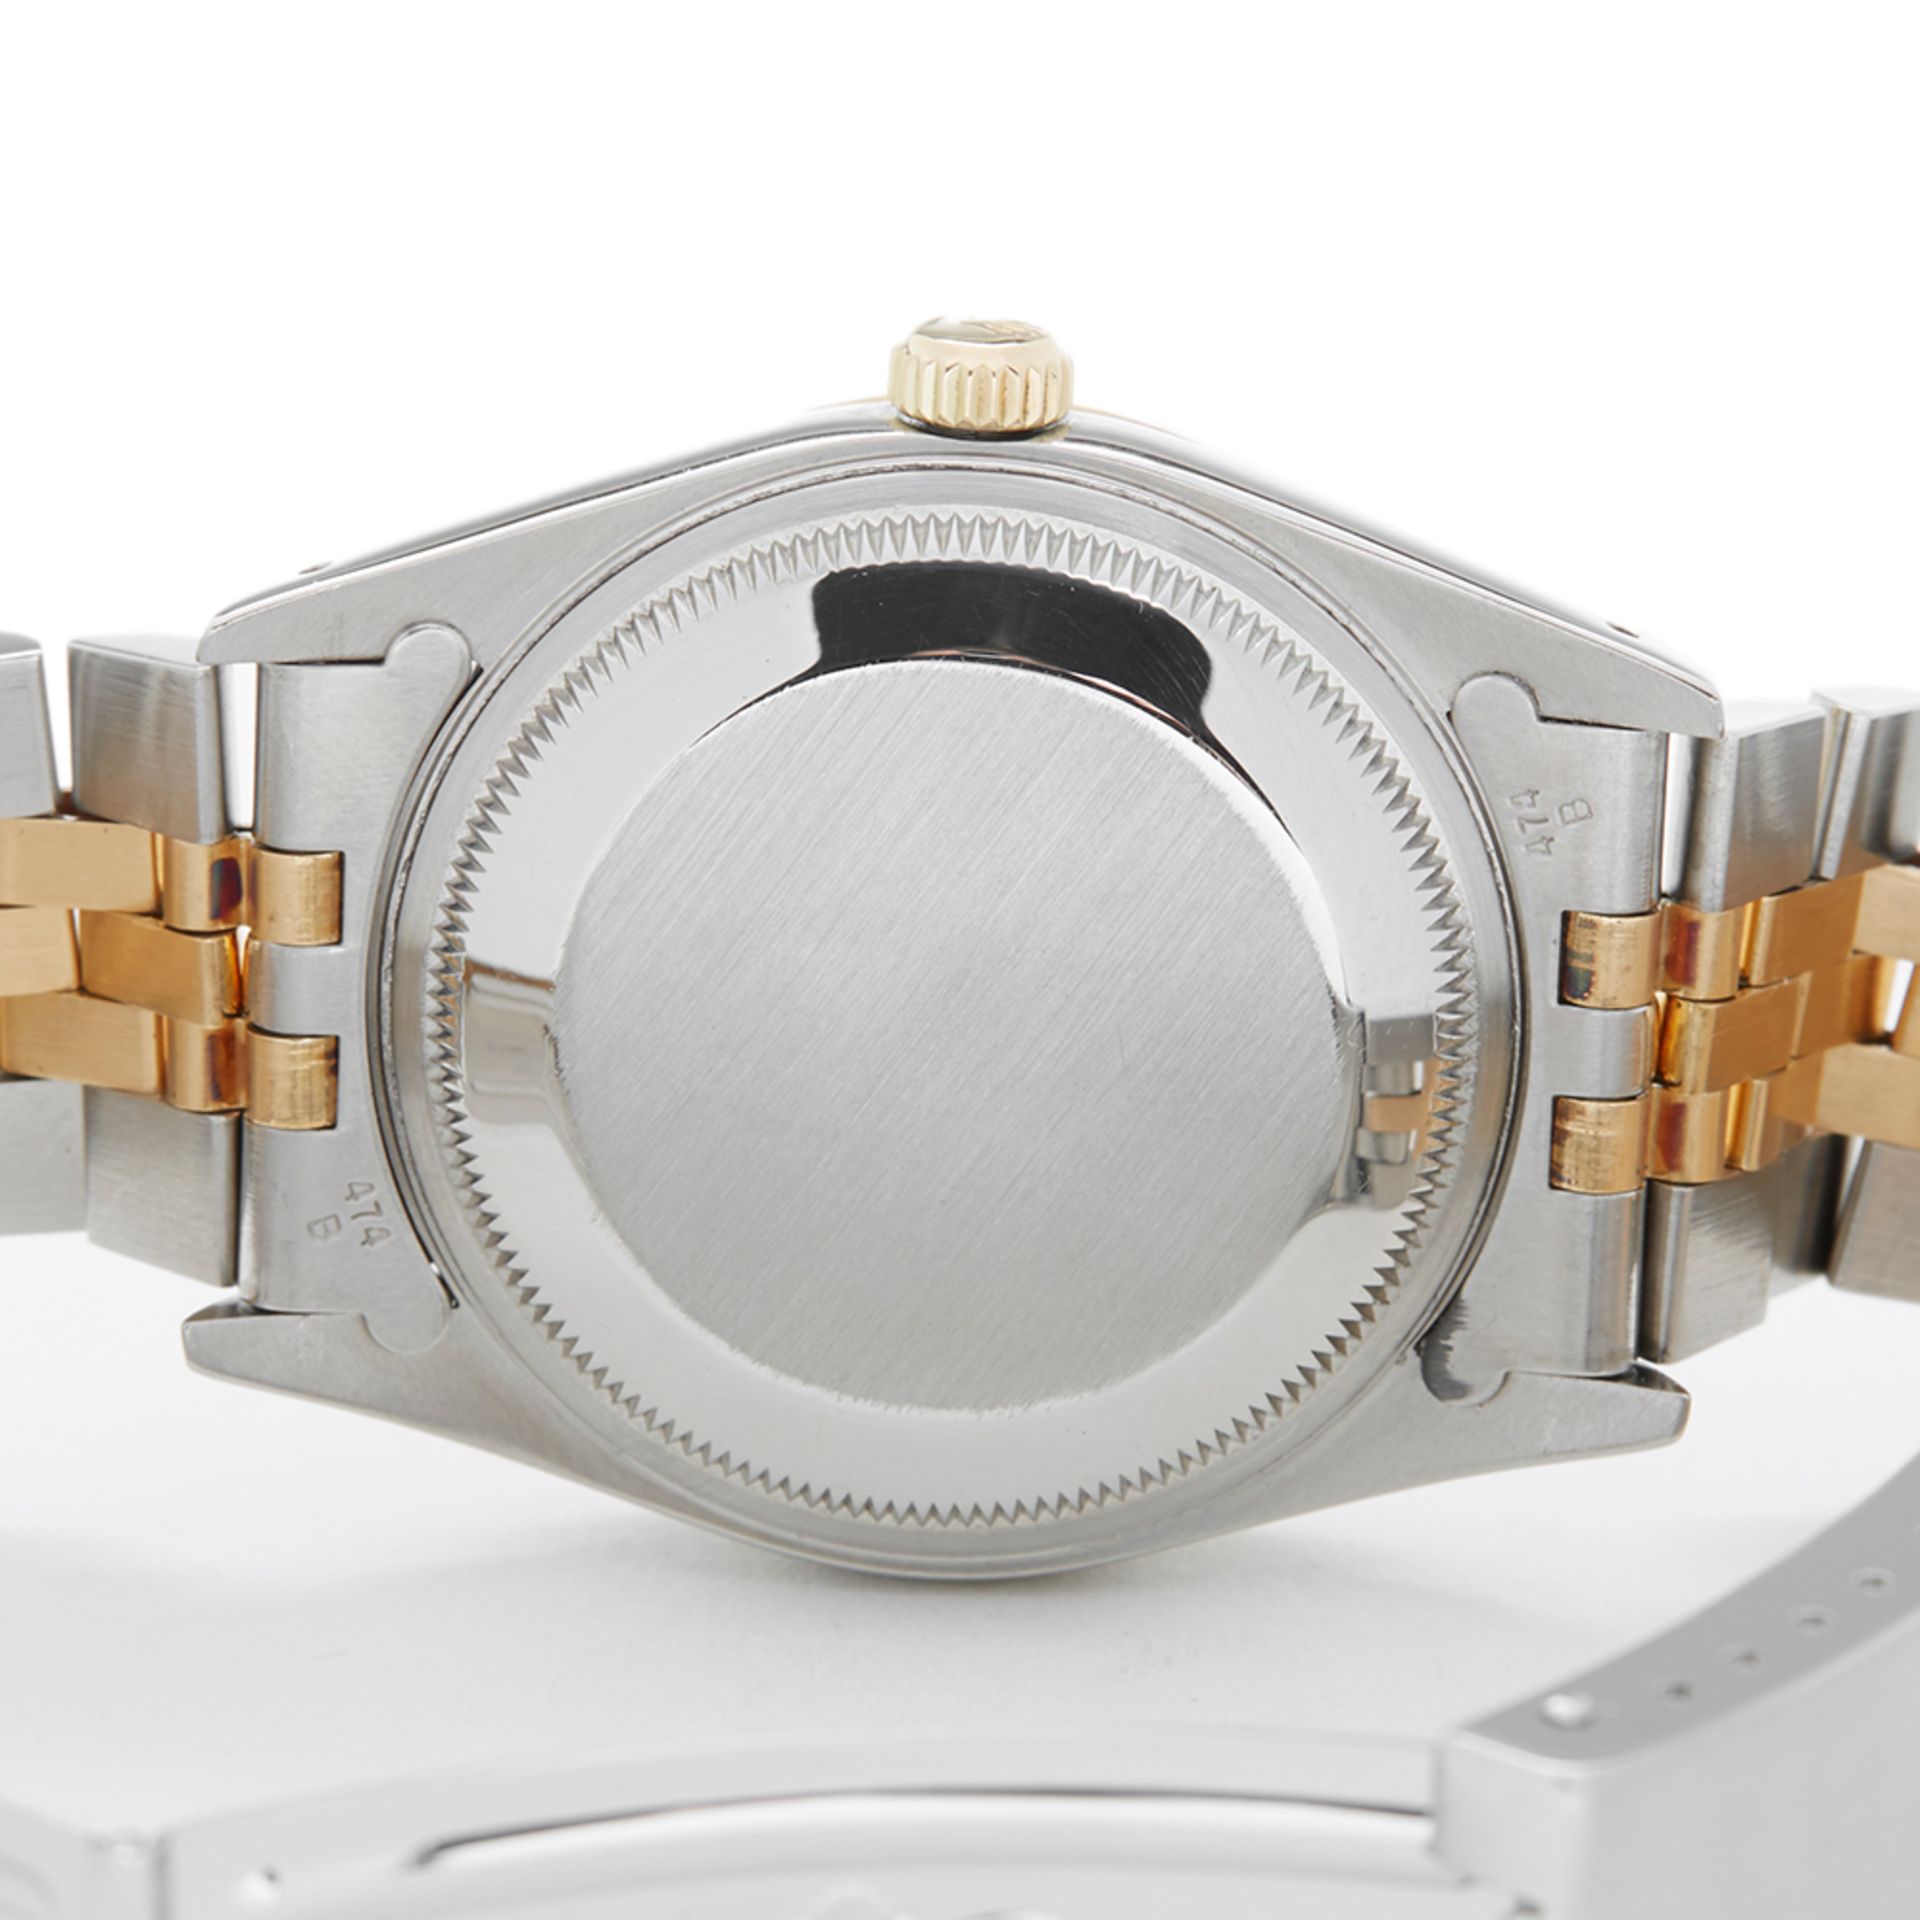 Oyster Perpetual Date 36mm Stainless Steel & 18k Yellow Gold - 15233 - Image 8 of 8